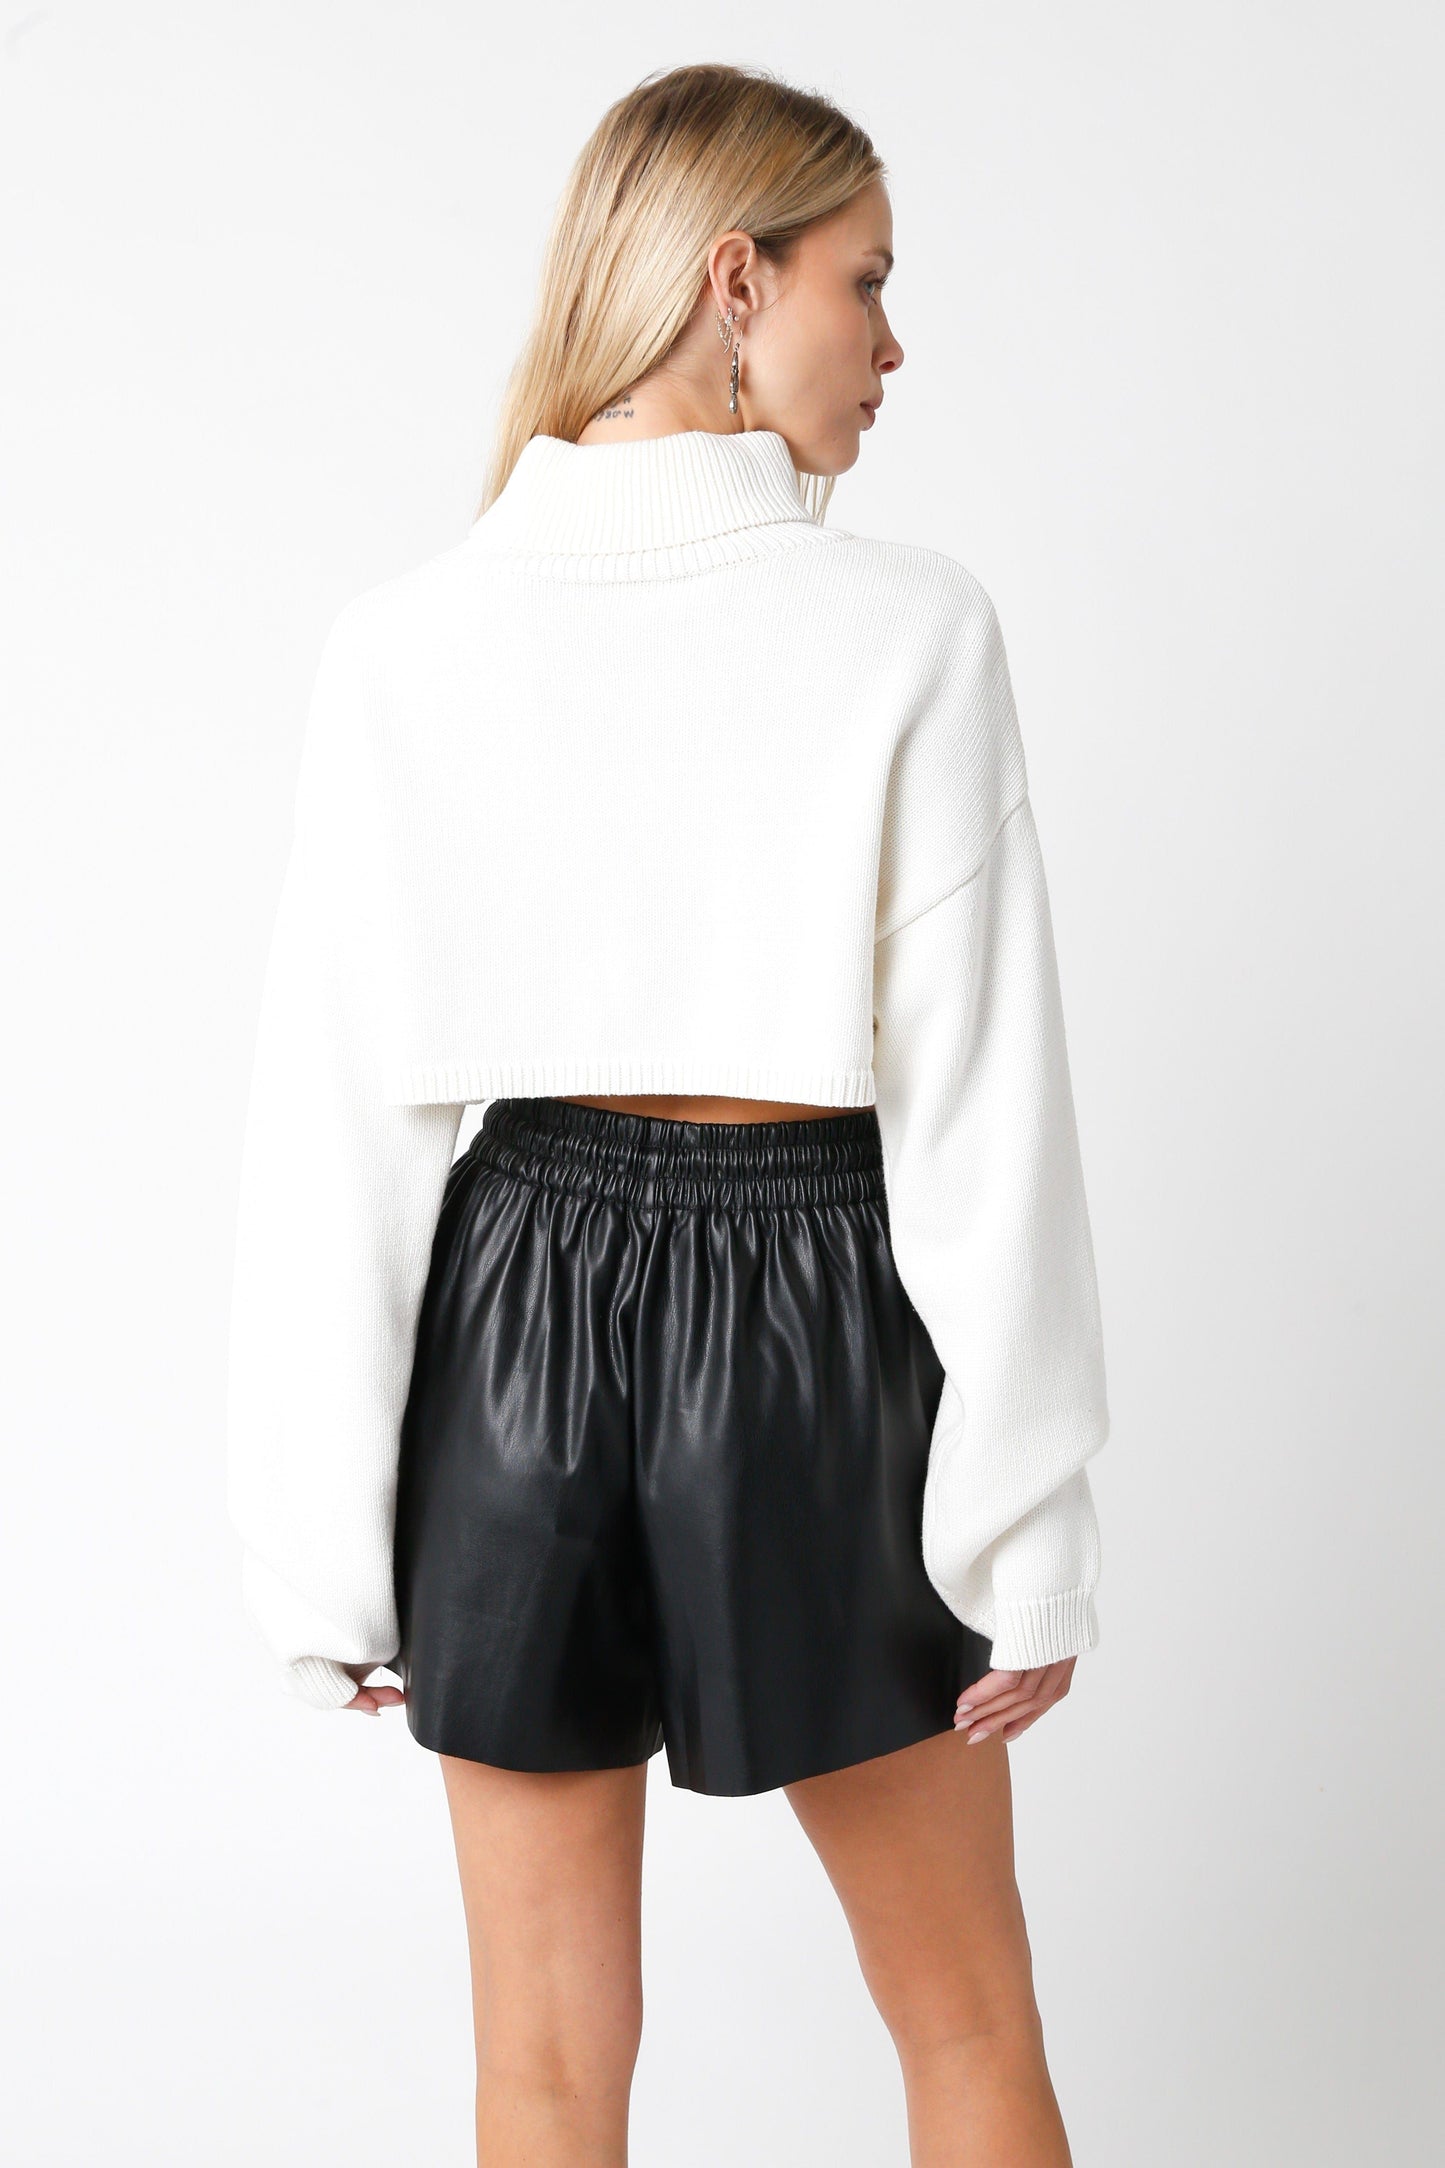 Olivaceous Olivaceous Marley Sweater - White